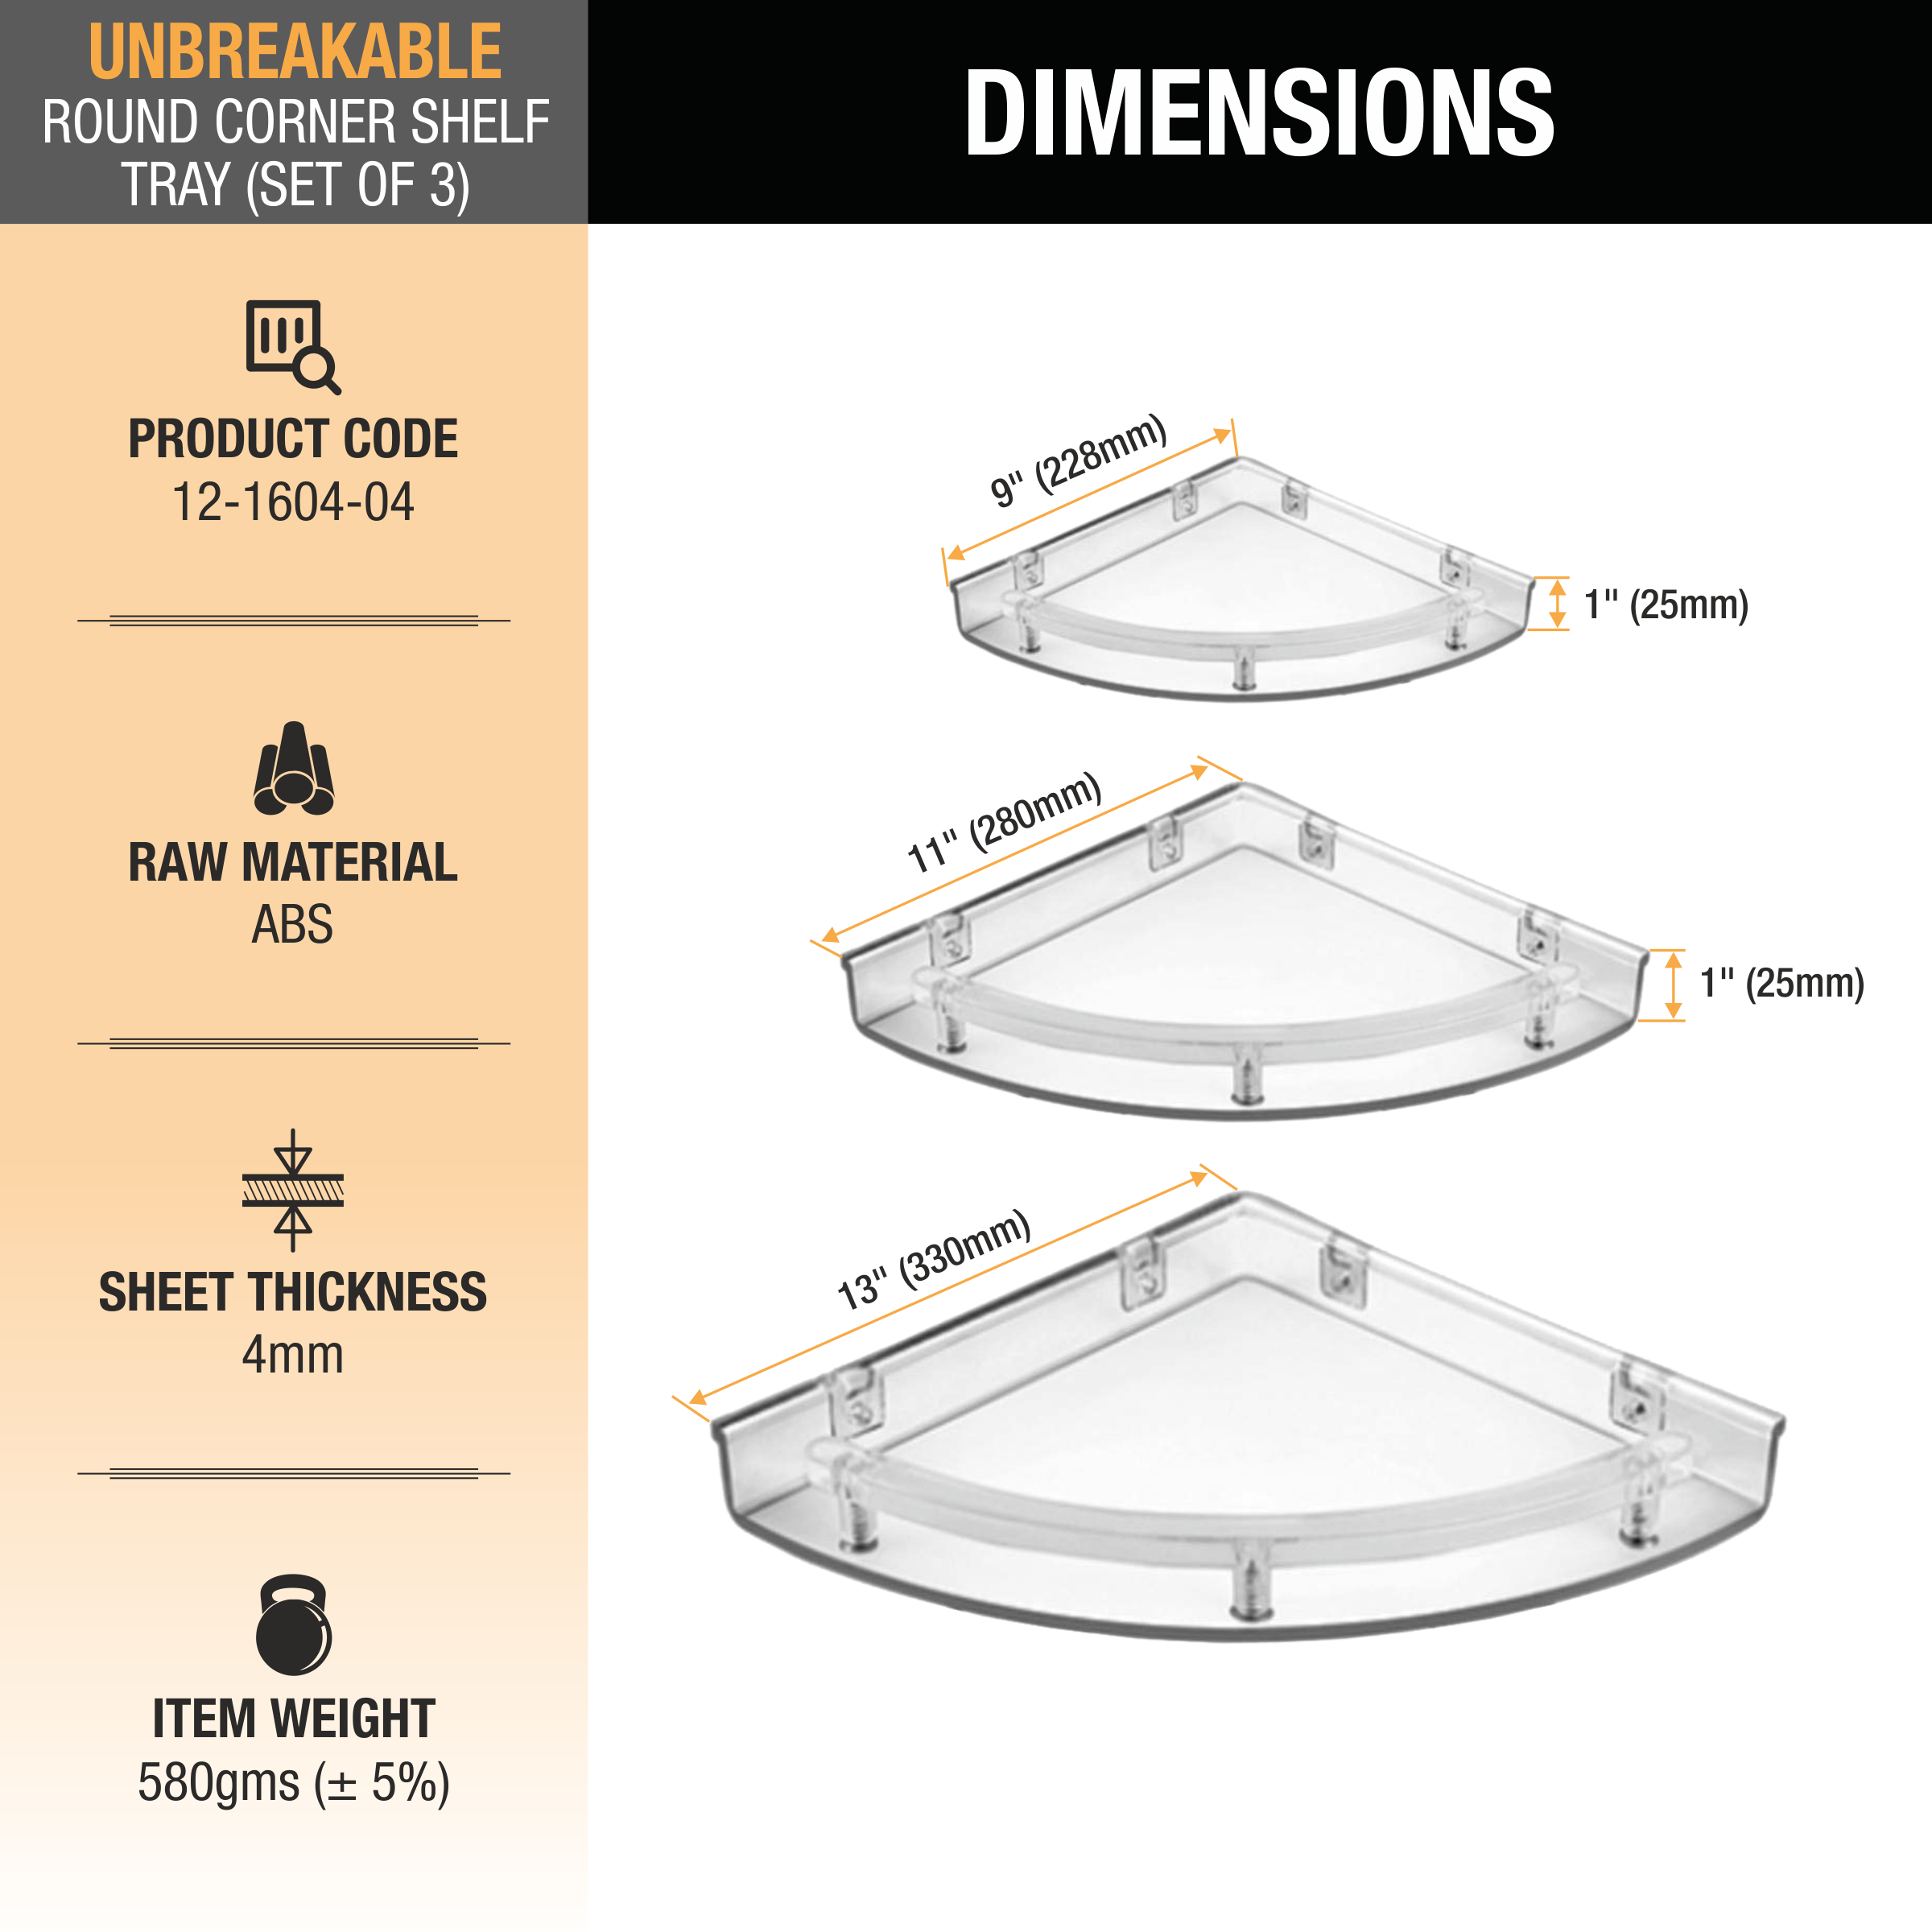 Round ABS Corner Shelf Tray (Set of 3) dimensions and size